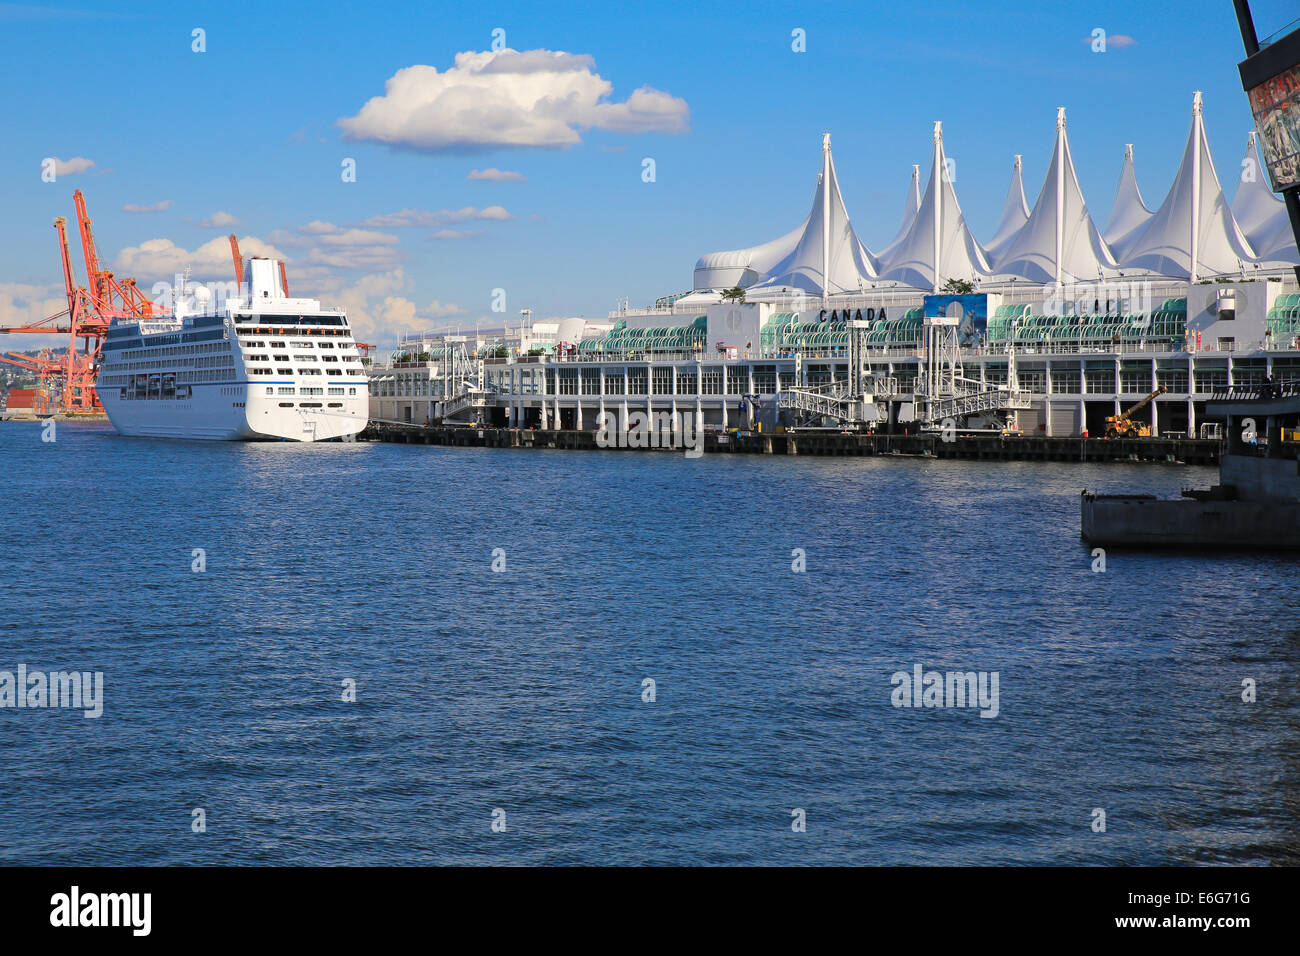 bc canada place landmark place ship vancouver waterfront Stock Photo